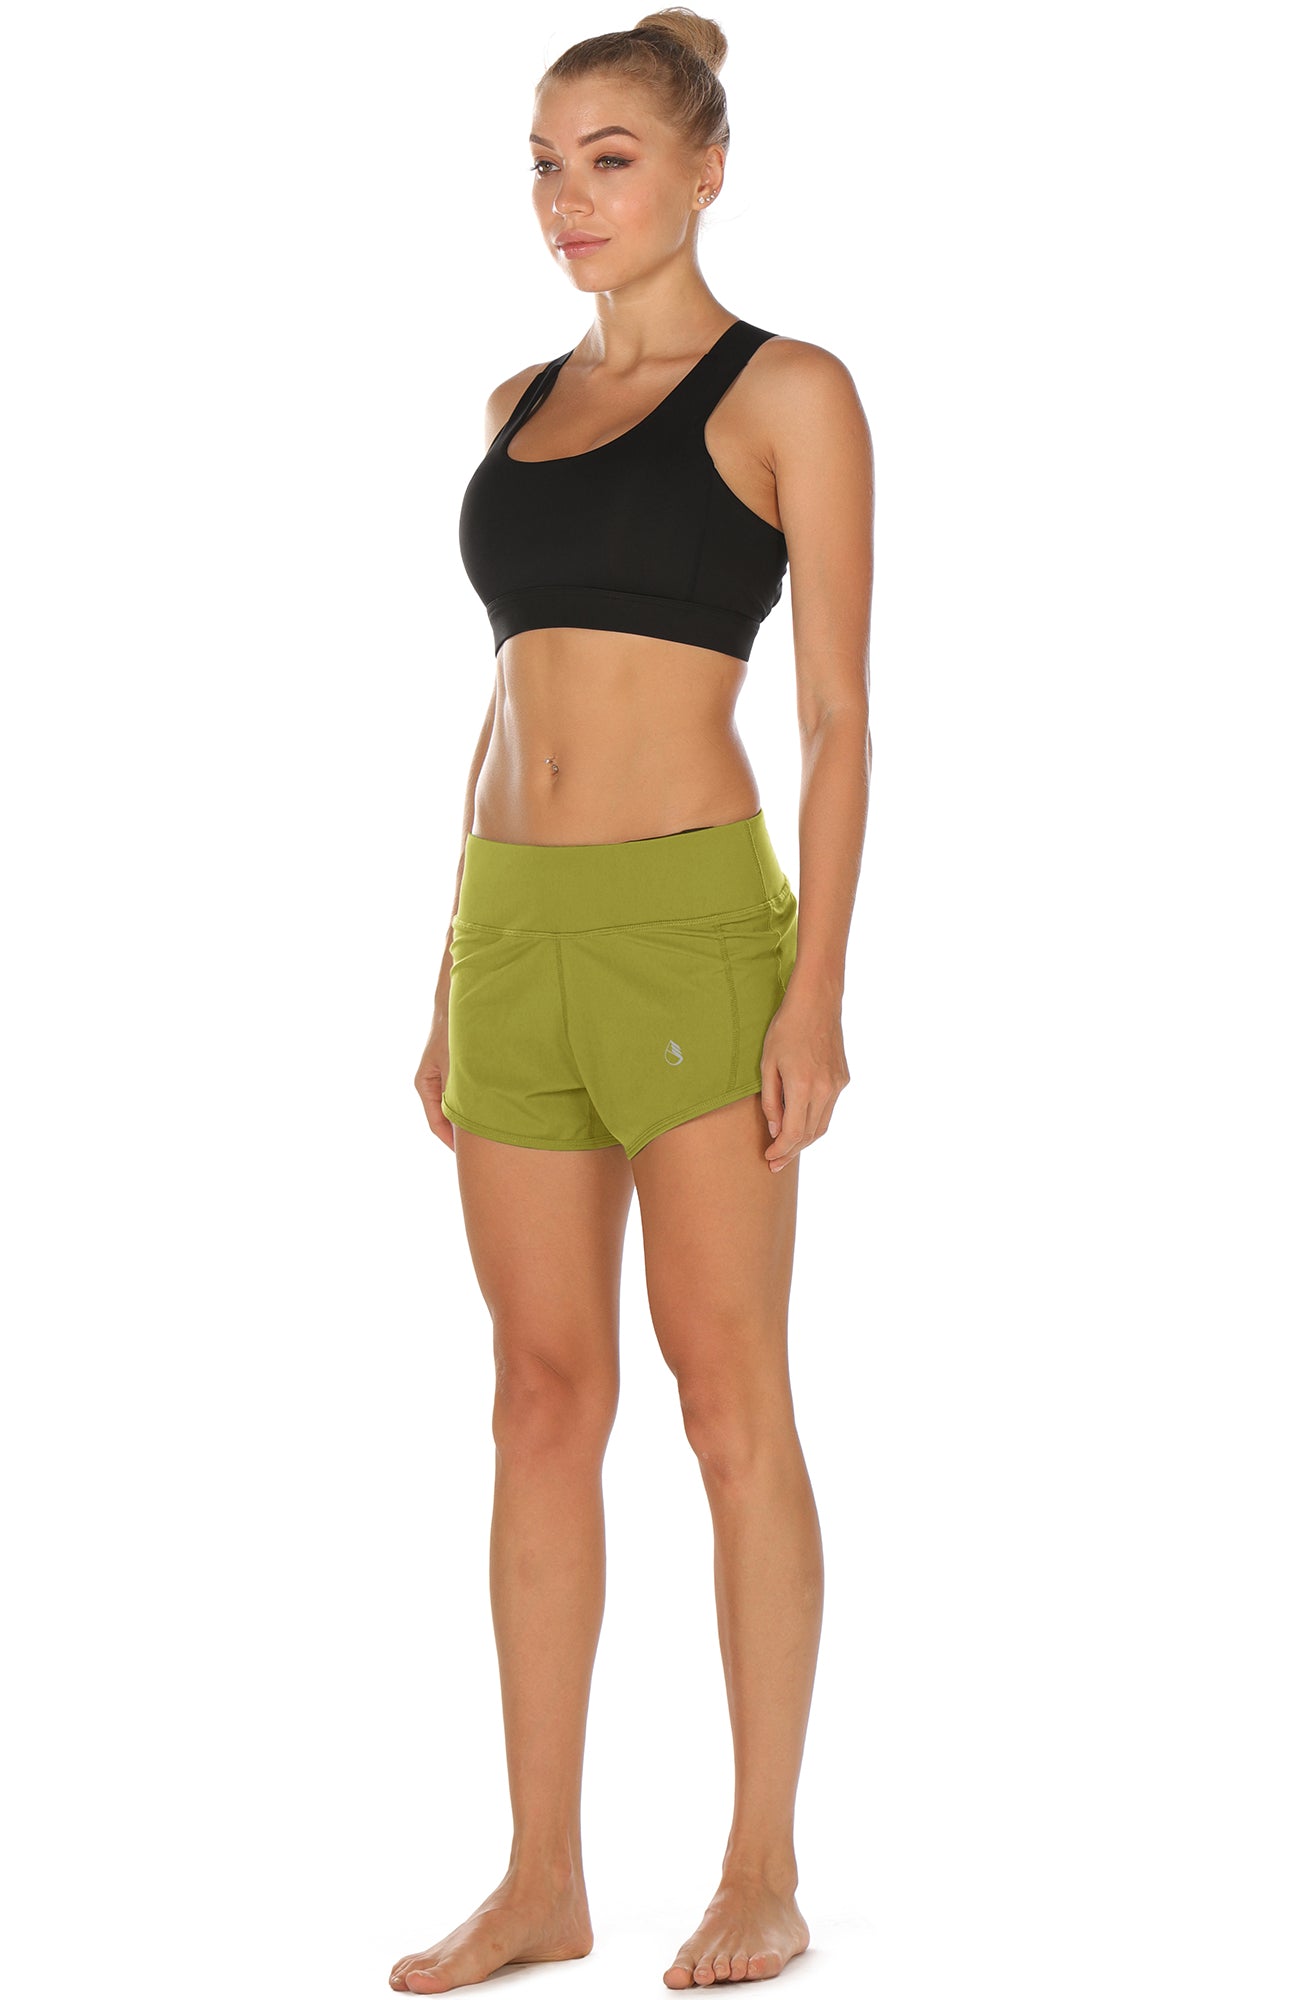 SP9 icyzone Running Yoga Shorts For Women - Activewear Workout